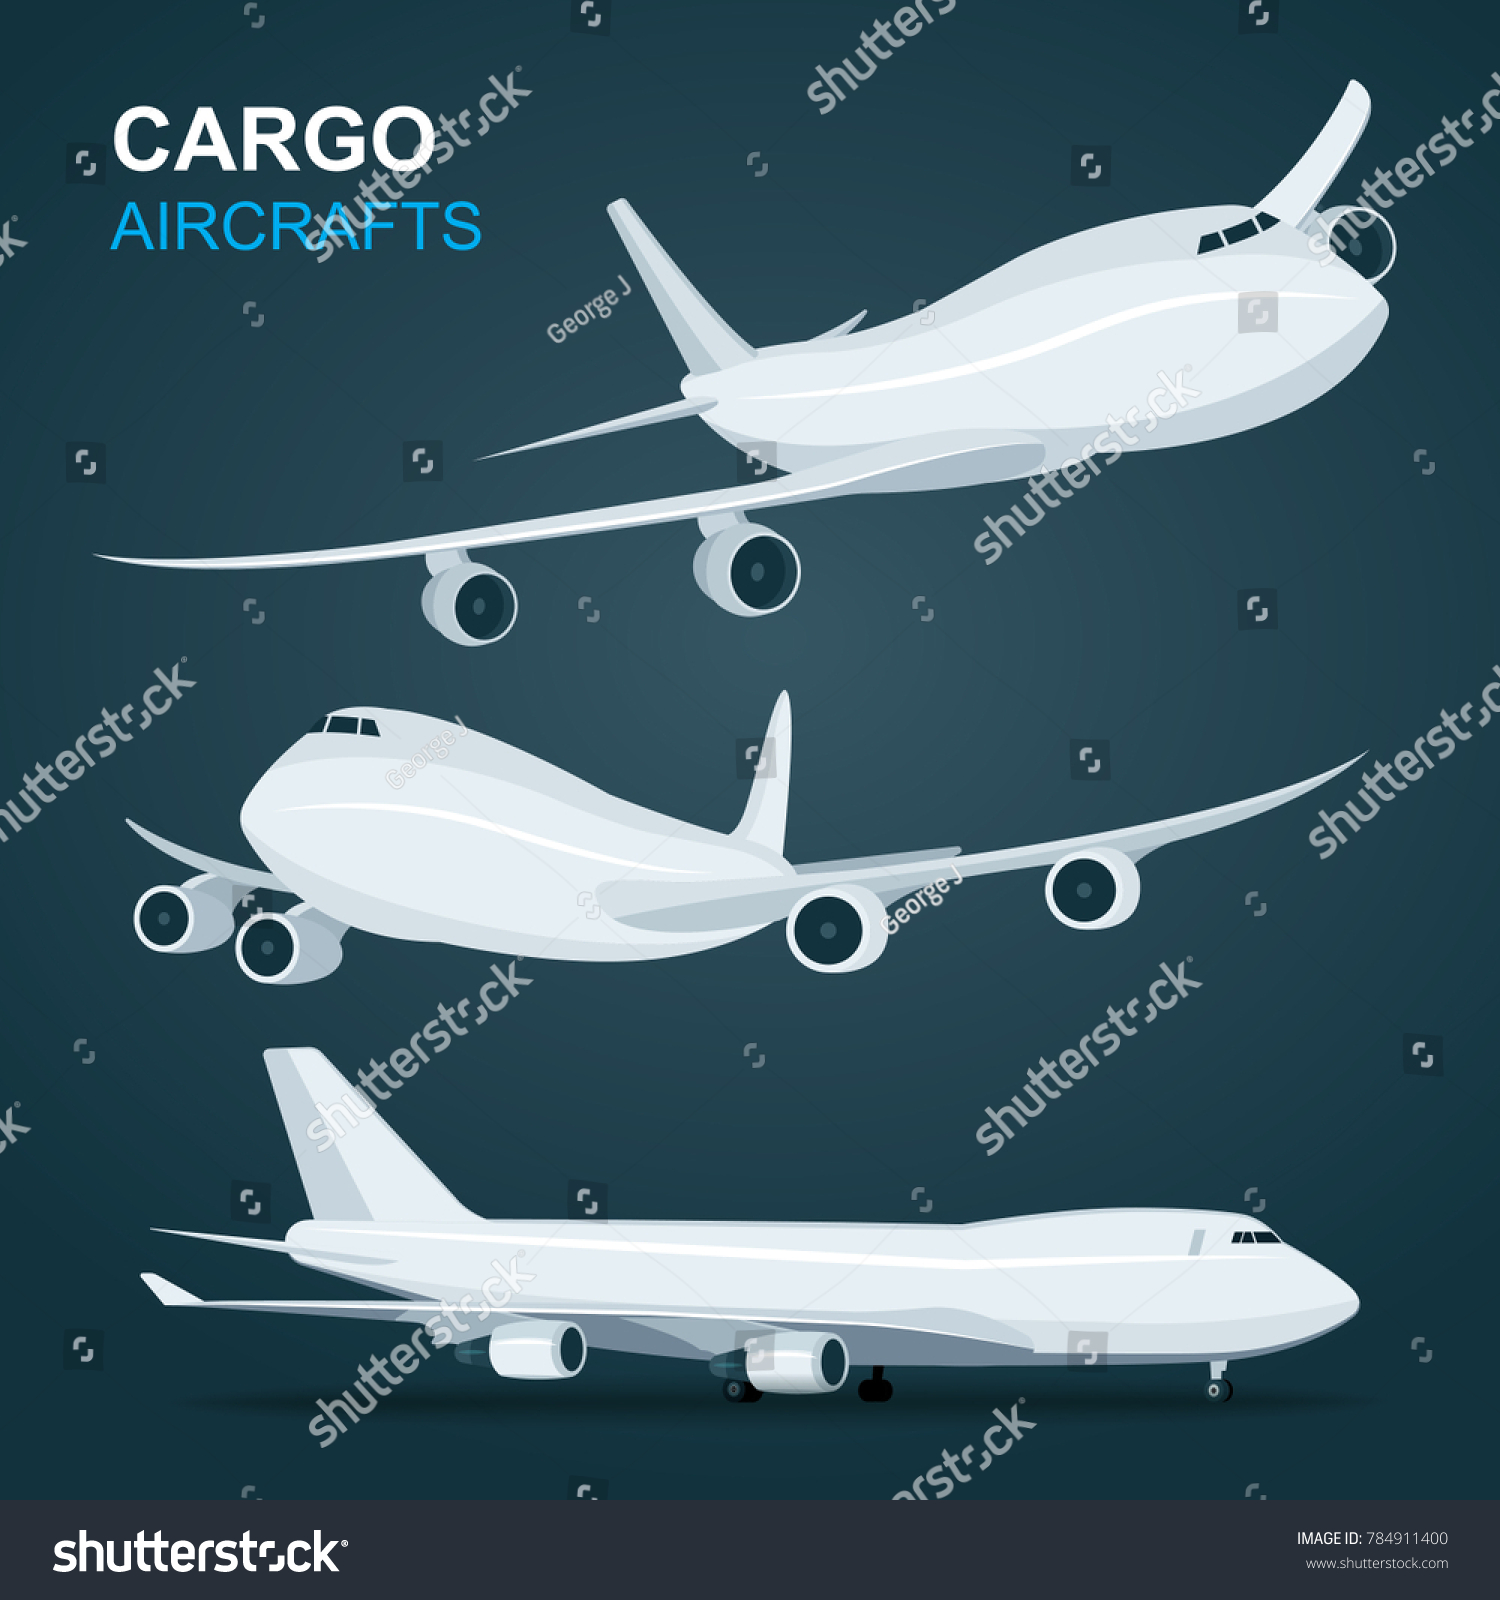 SVG of Cargo Aircraft set.
Airplane in profile, side view, from the front and top view isolated vector illustration. svg